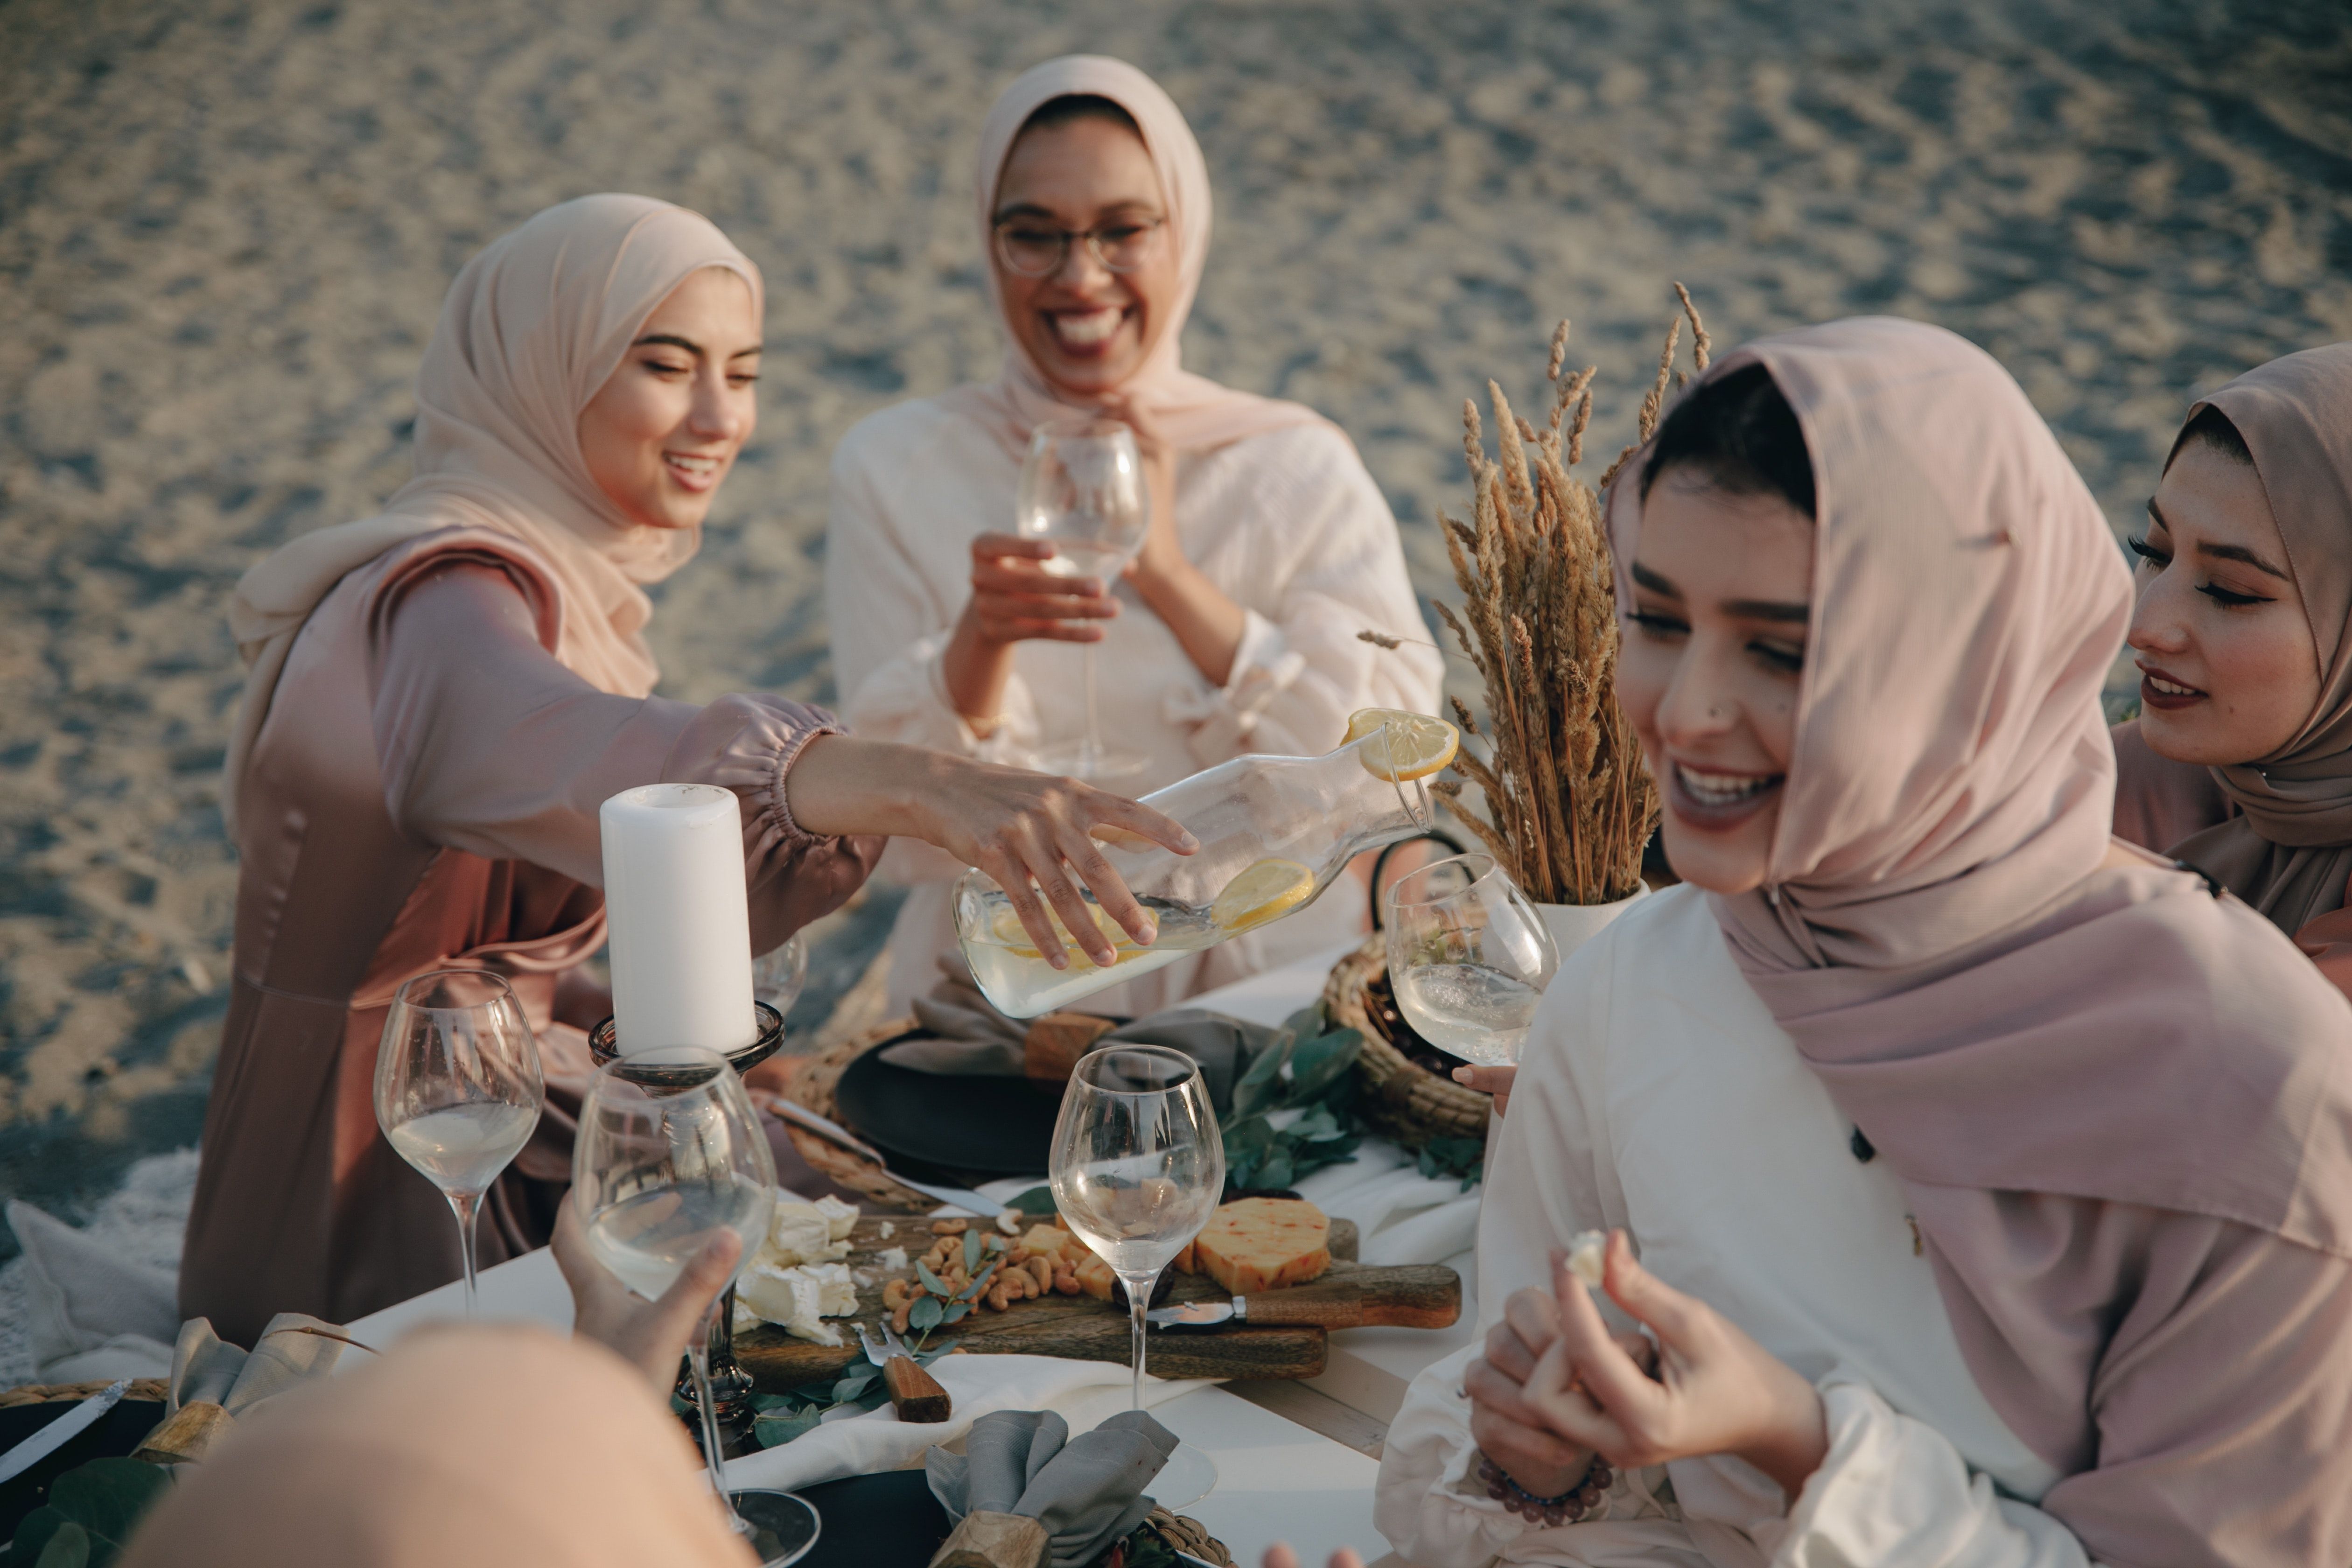 Photo by PNW Production: https://www.pexels.com/photo/group-of-women-wearing-hijab-sitting-on-beach-sand-drinking-and-celebrating-8995838/